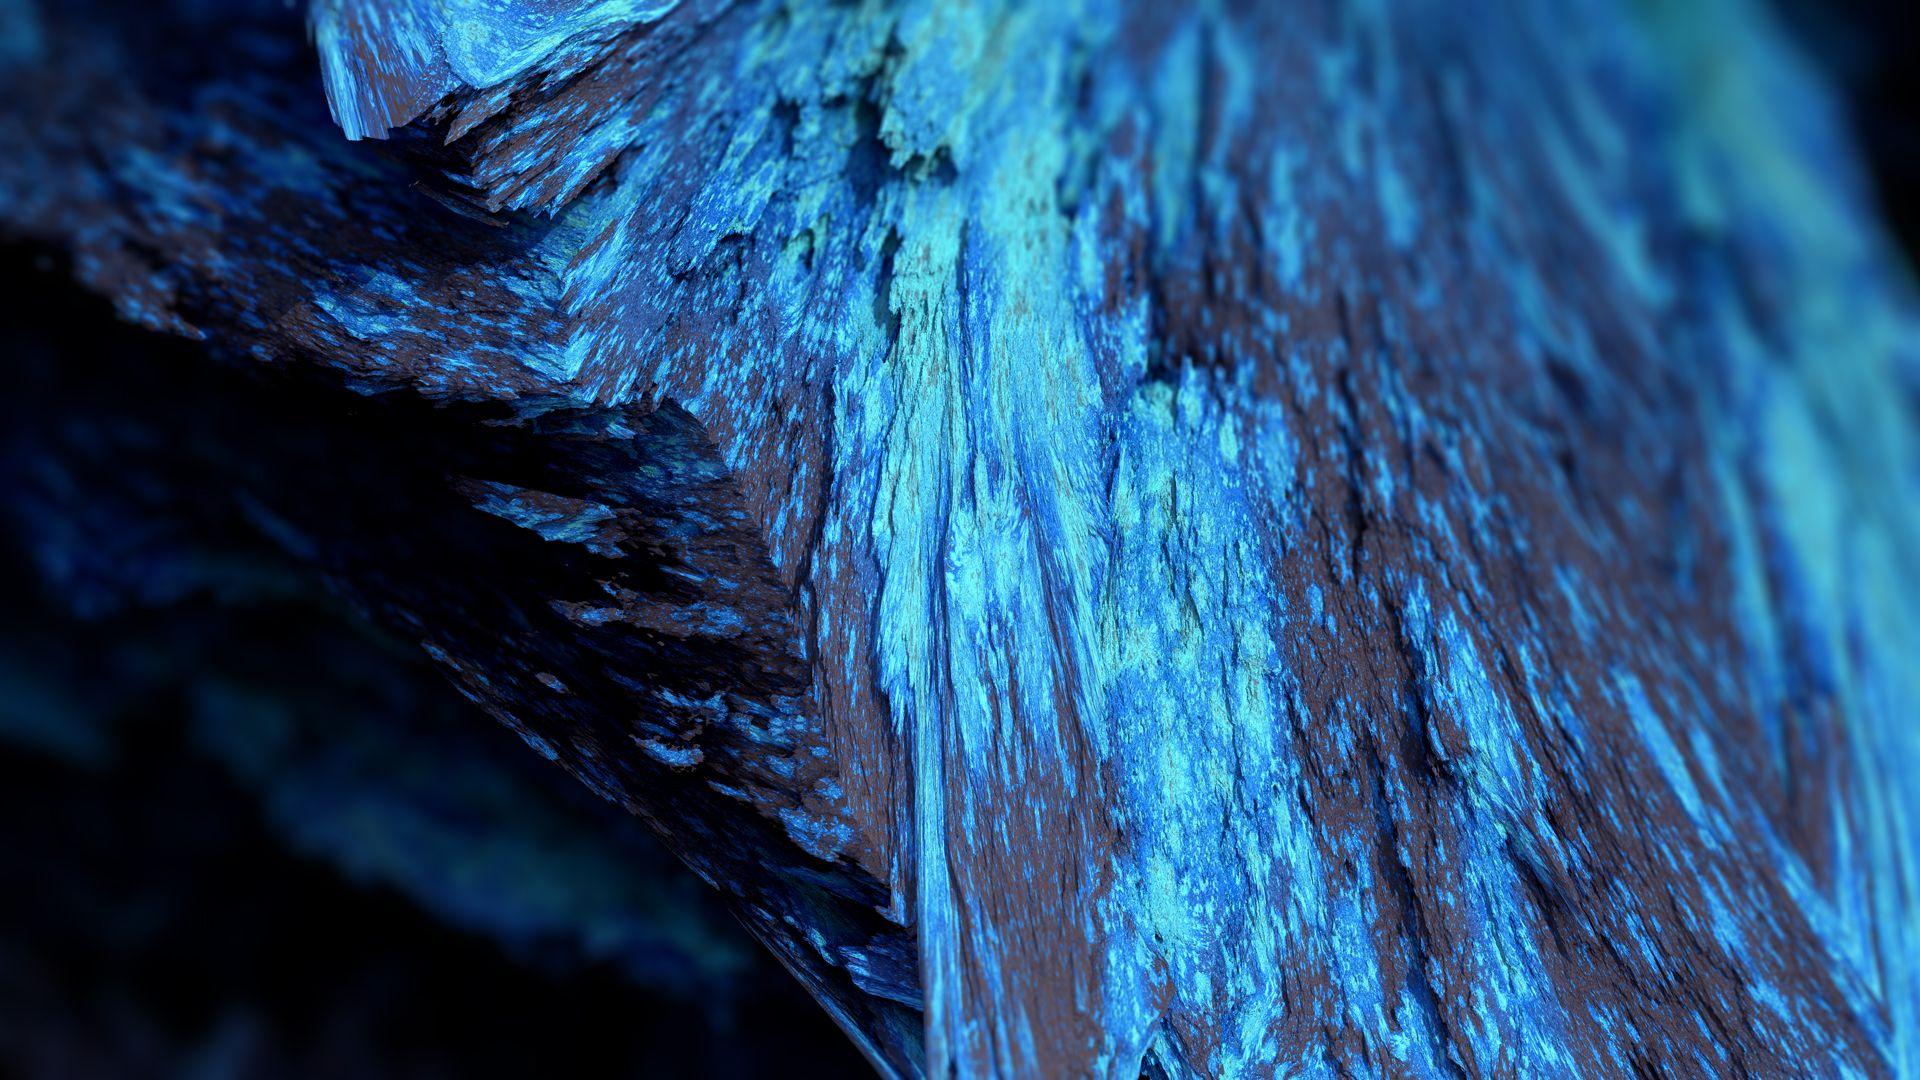 Blue Mineral Nature Wallpaper 60557 1920x1080 px